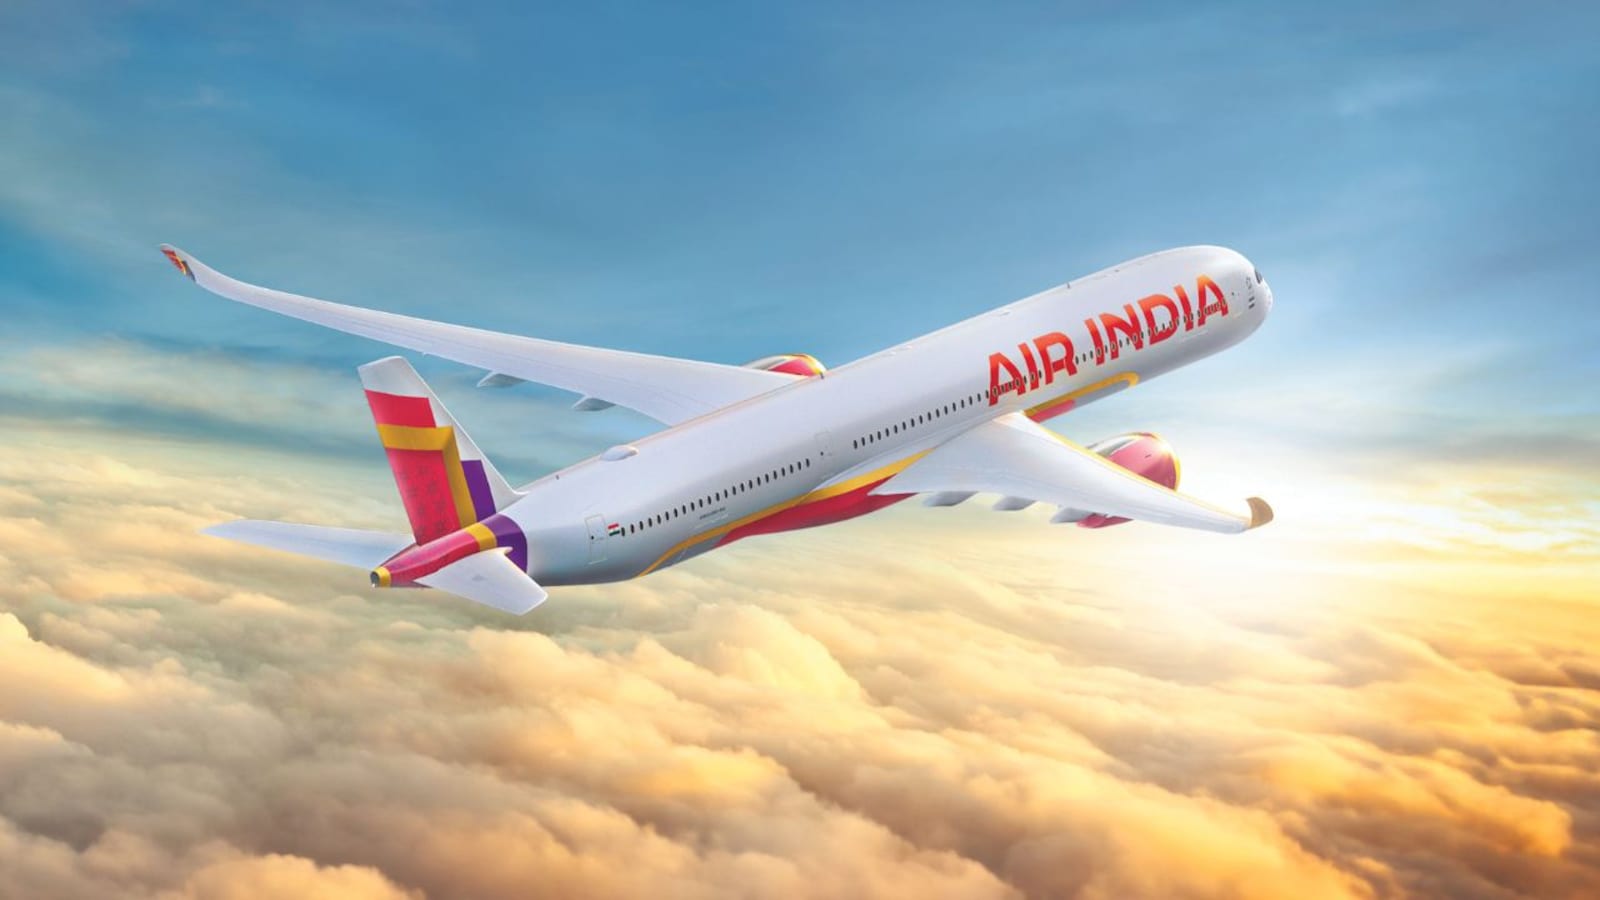 Air India ने दुबई के लिए उड़ानें की रद्द 

Air India Due to operational disruption at Dubai Airport of United Arab Emirates (UAE), which is one of the busiest airports in the world, Air India has canceled its flights to and from there.